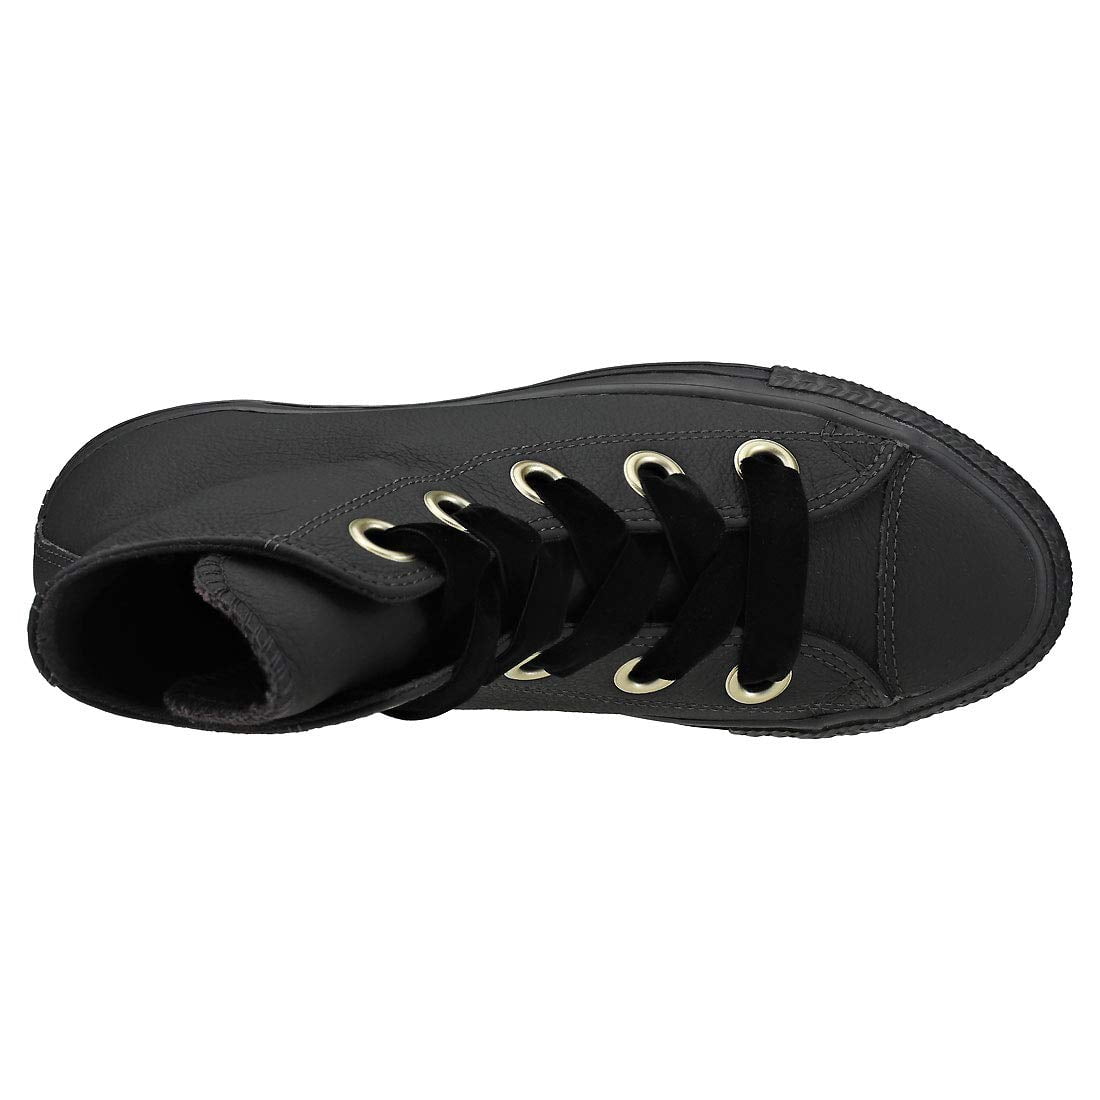 black converse with gold eyelets